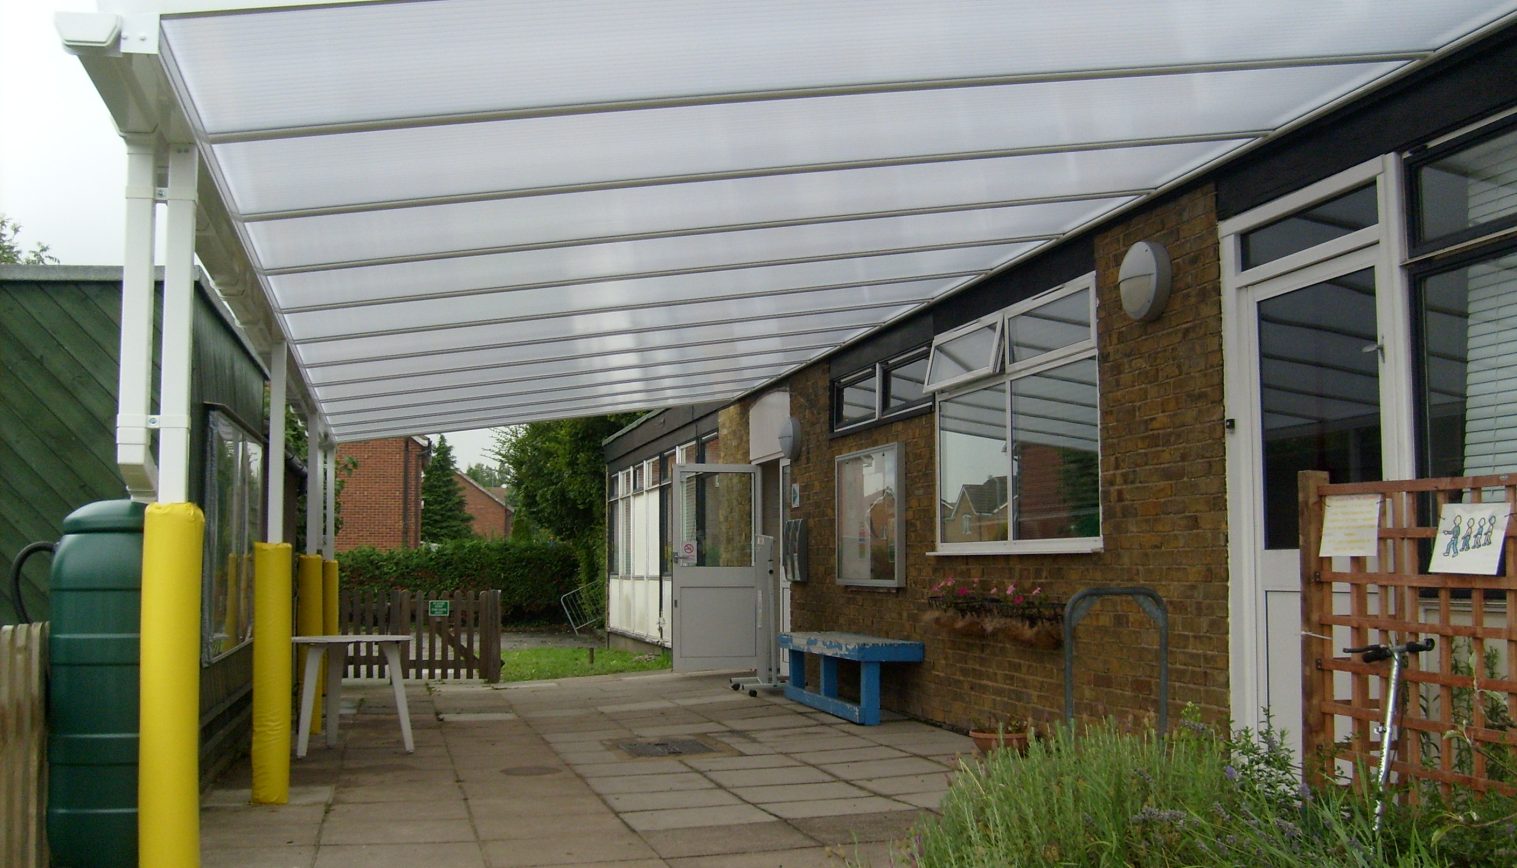 Greenfield Children’s Centre – Wall Mounted Canopy